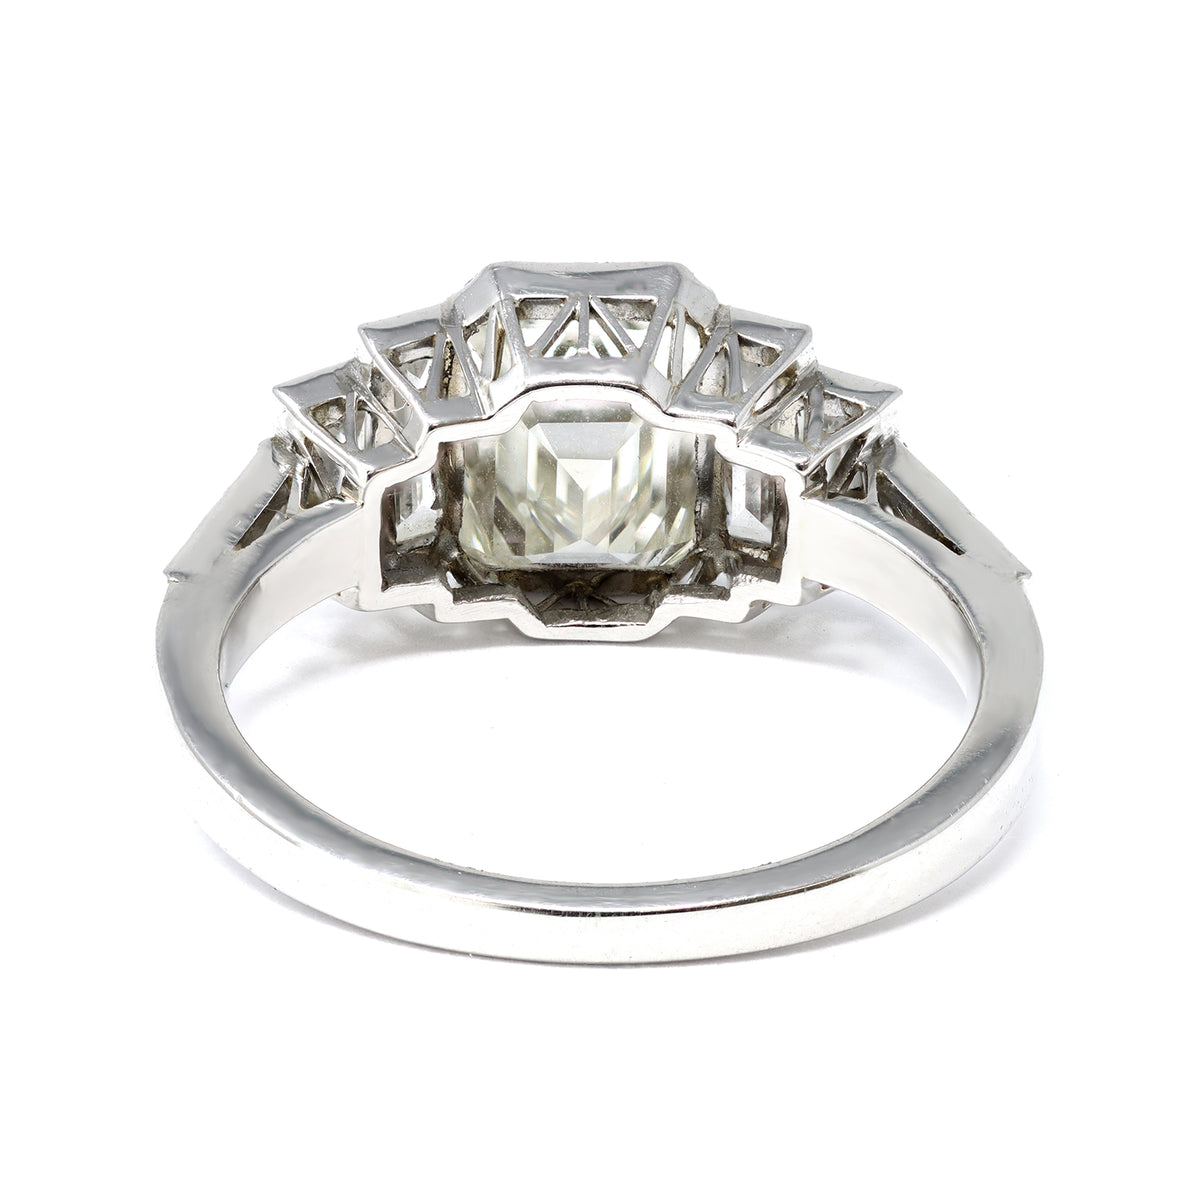 An Elegant Emerald-cut Diamond Ring with side baguettes set in Platinum galleria view